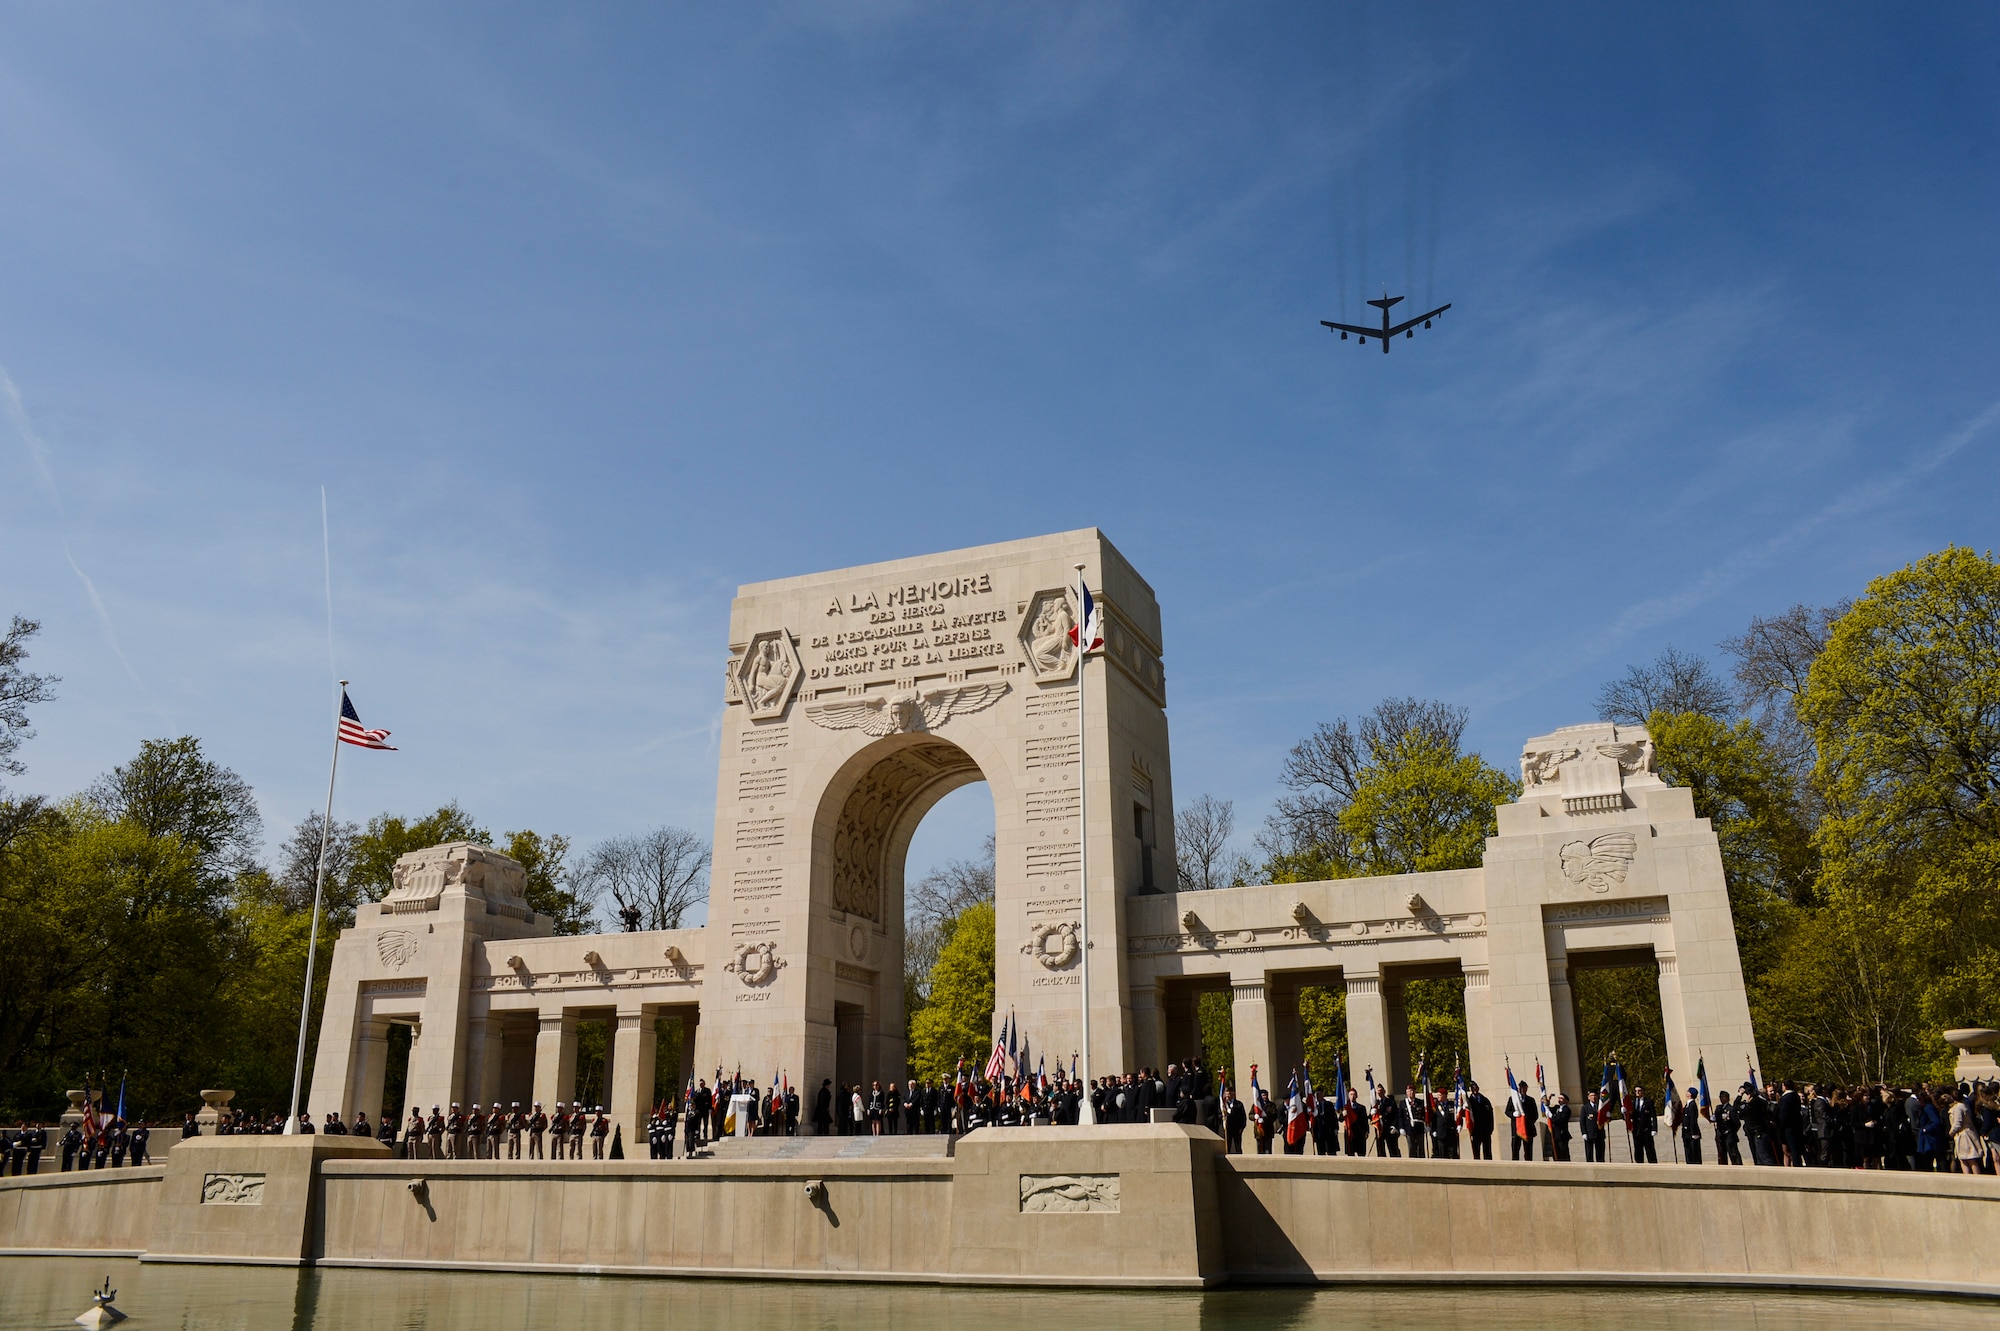 PARIS – A U.S. Air Force B-52 Stratofortress bomber flies over the Lafayette Escadrille Memorial in Marnes-la-Coquette, France, April 20, 2016, during a ceremony honoring the 268 Americans who joined the French Air Force before the U.S. officially engaged in World War I. In addition to the B-52, four USAF fifth generation F-22 Raptor fighters, three FAF Mirage 2000Ns, one FAF Rafale and a World War I-era Stearman PT-17 biplane performed flyovers during the ceremony commemorating the 100th anniversary of the Layfette Escadrille’s formation. Men of the Lafayette Escadrille and Lafayette Flying Crops were critical to the formation of the USAF. (U.S. Air Force Photo by Tech. Sgt. Joshua DeMotts/Released)